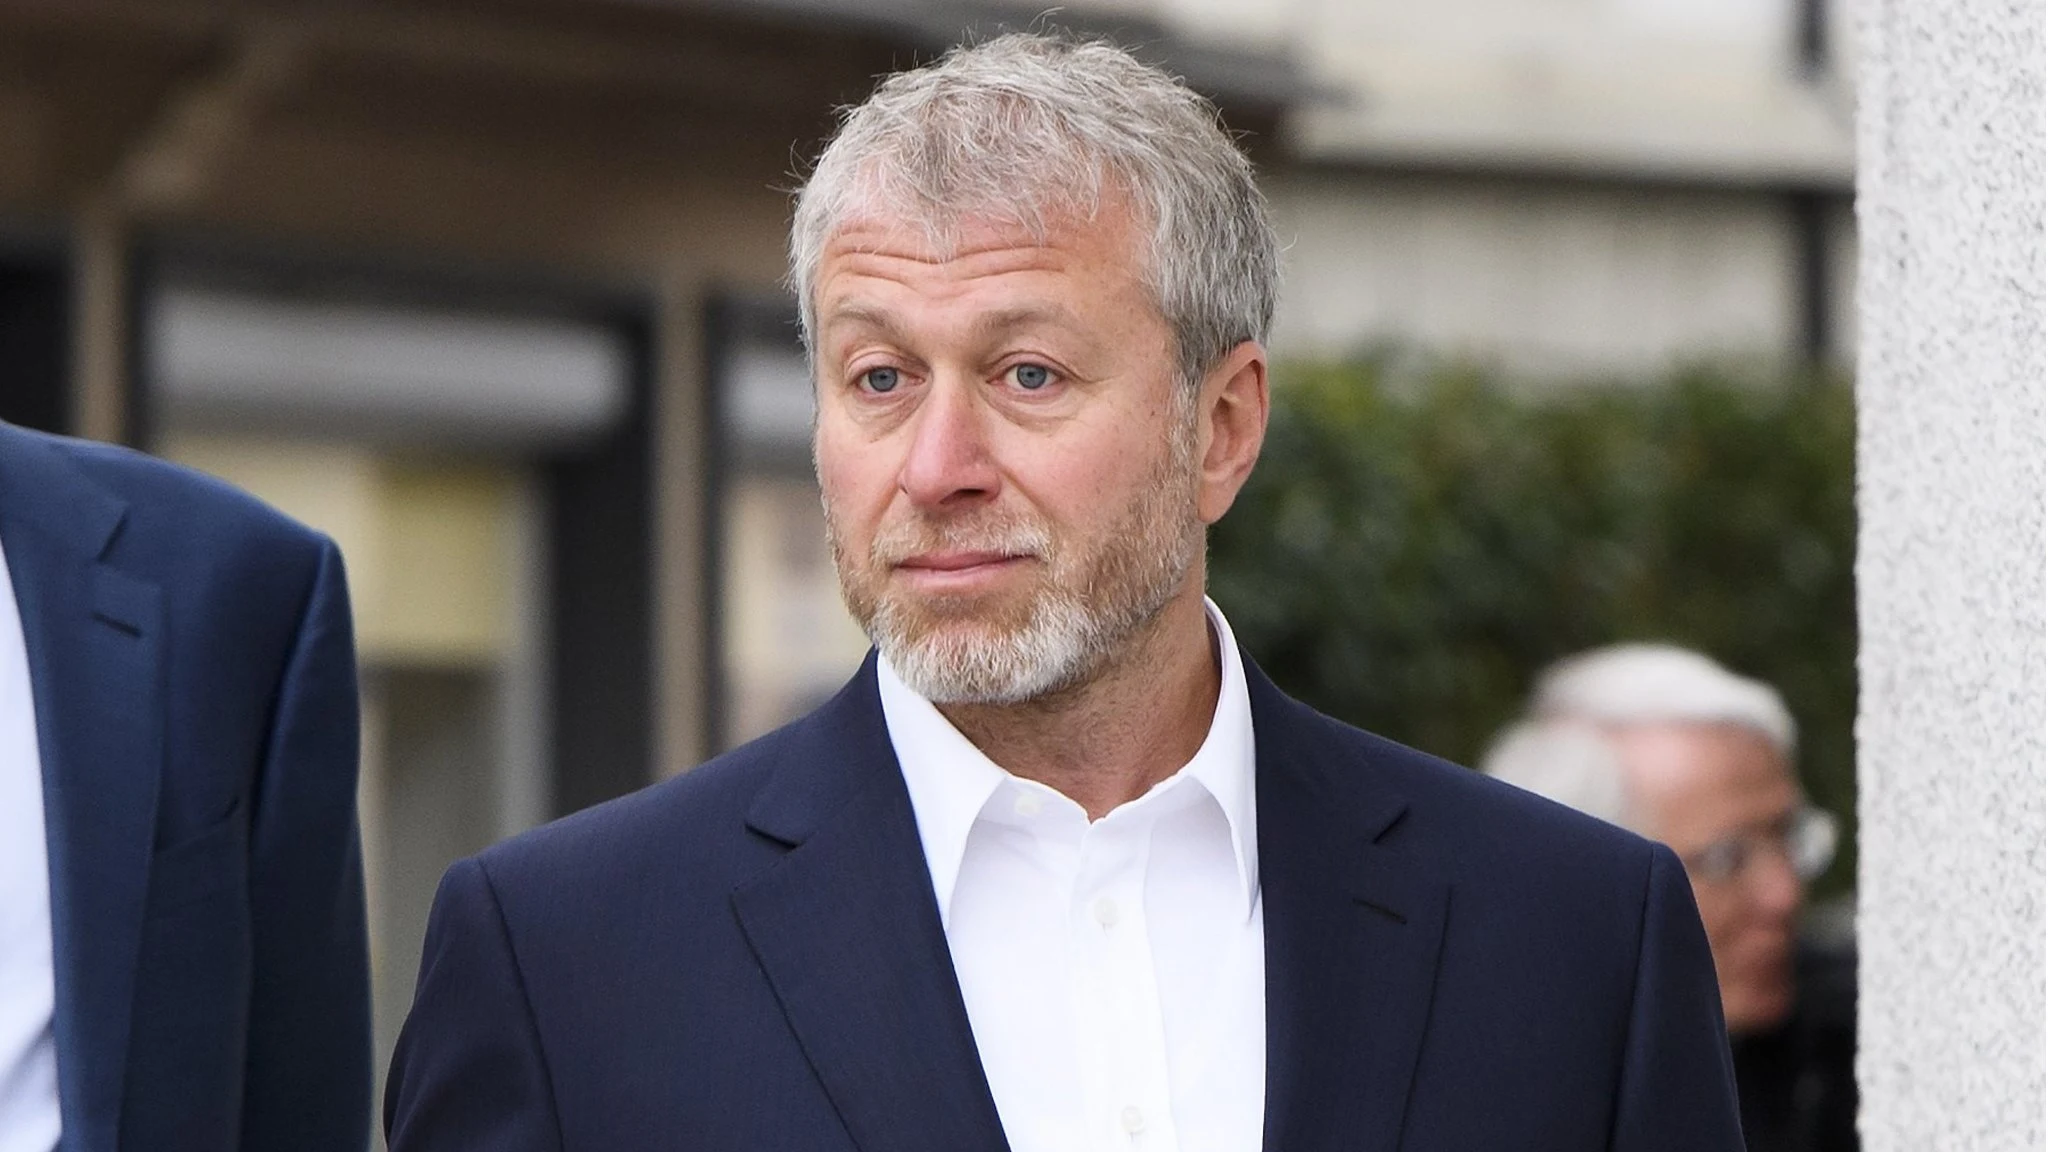 Chelsea owner Roman Abramovich turns 55 today